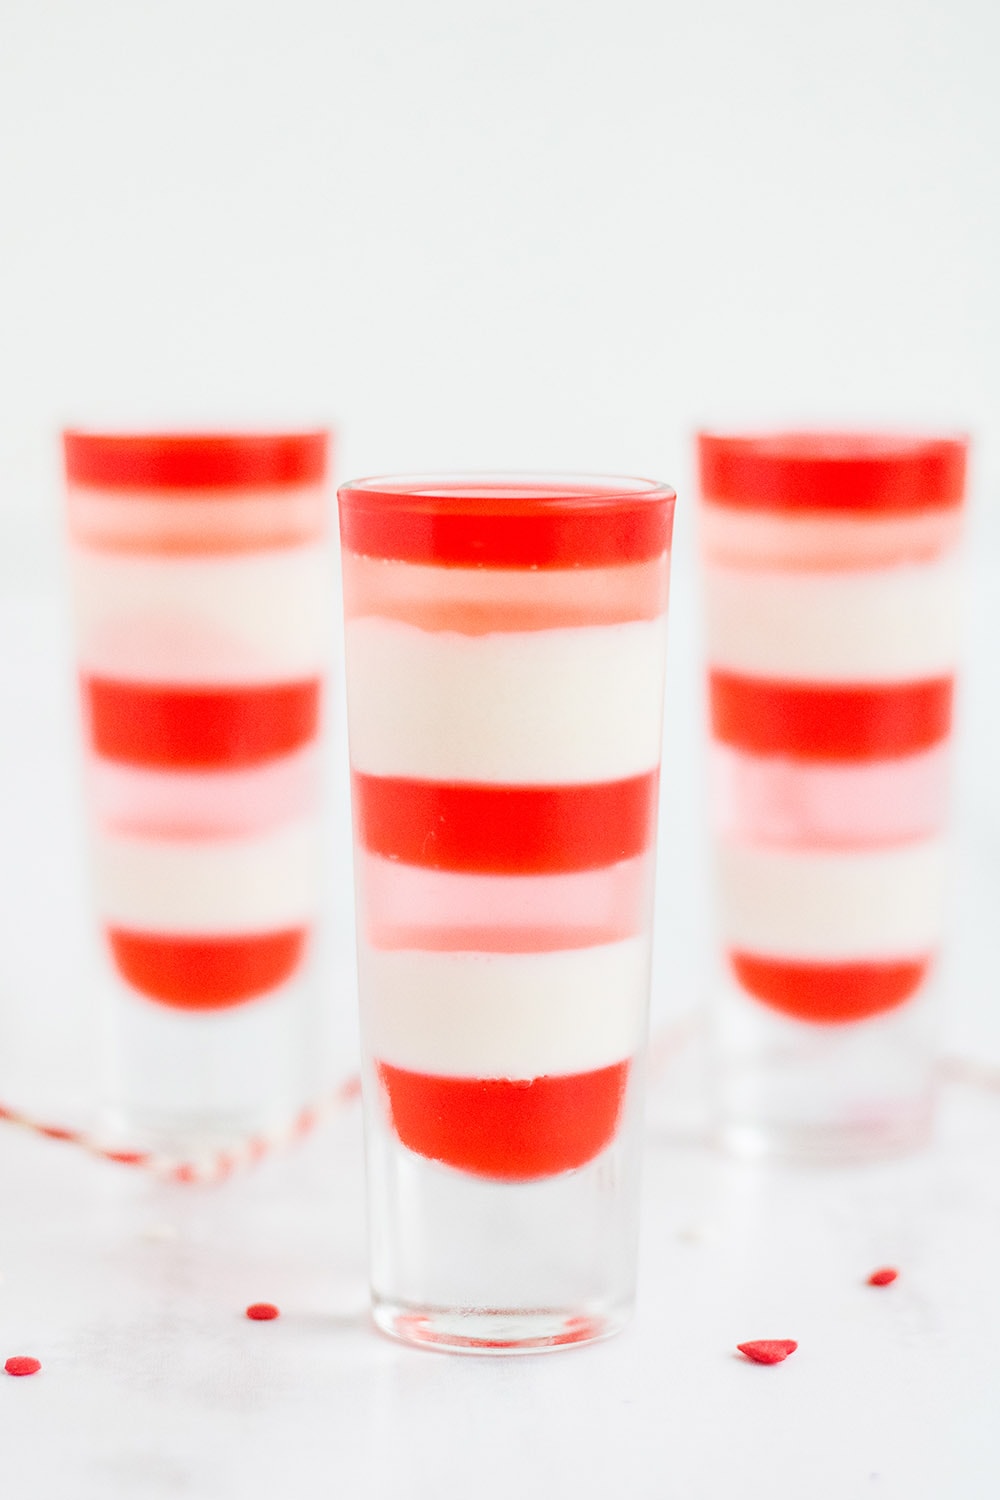 Three dessert shooters filled with red, white, and pink jello layers.